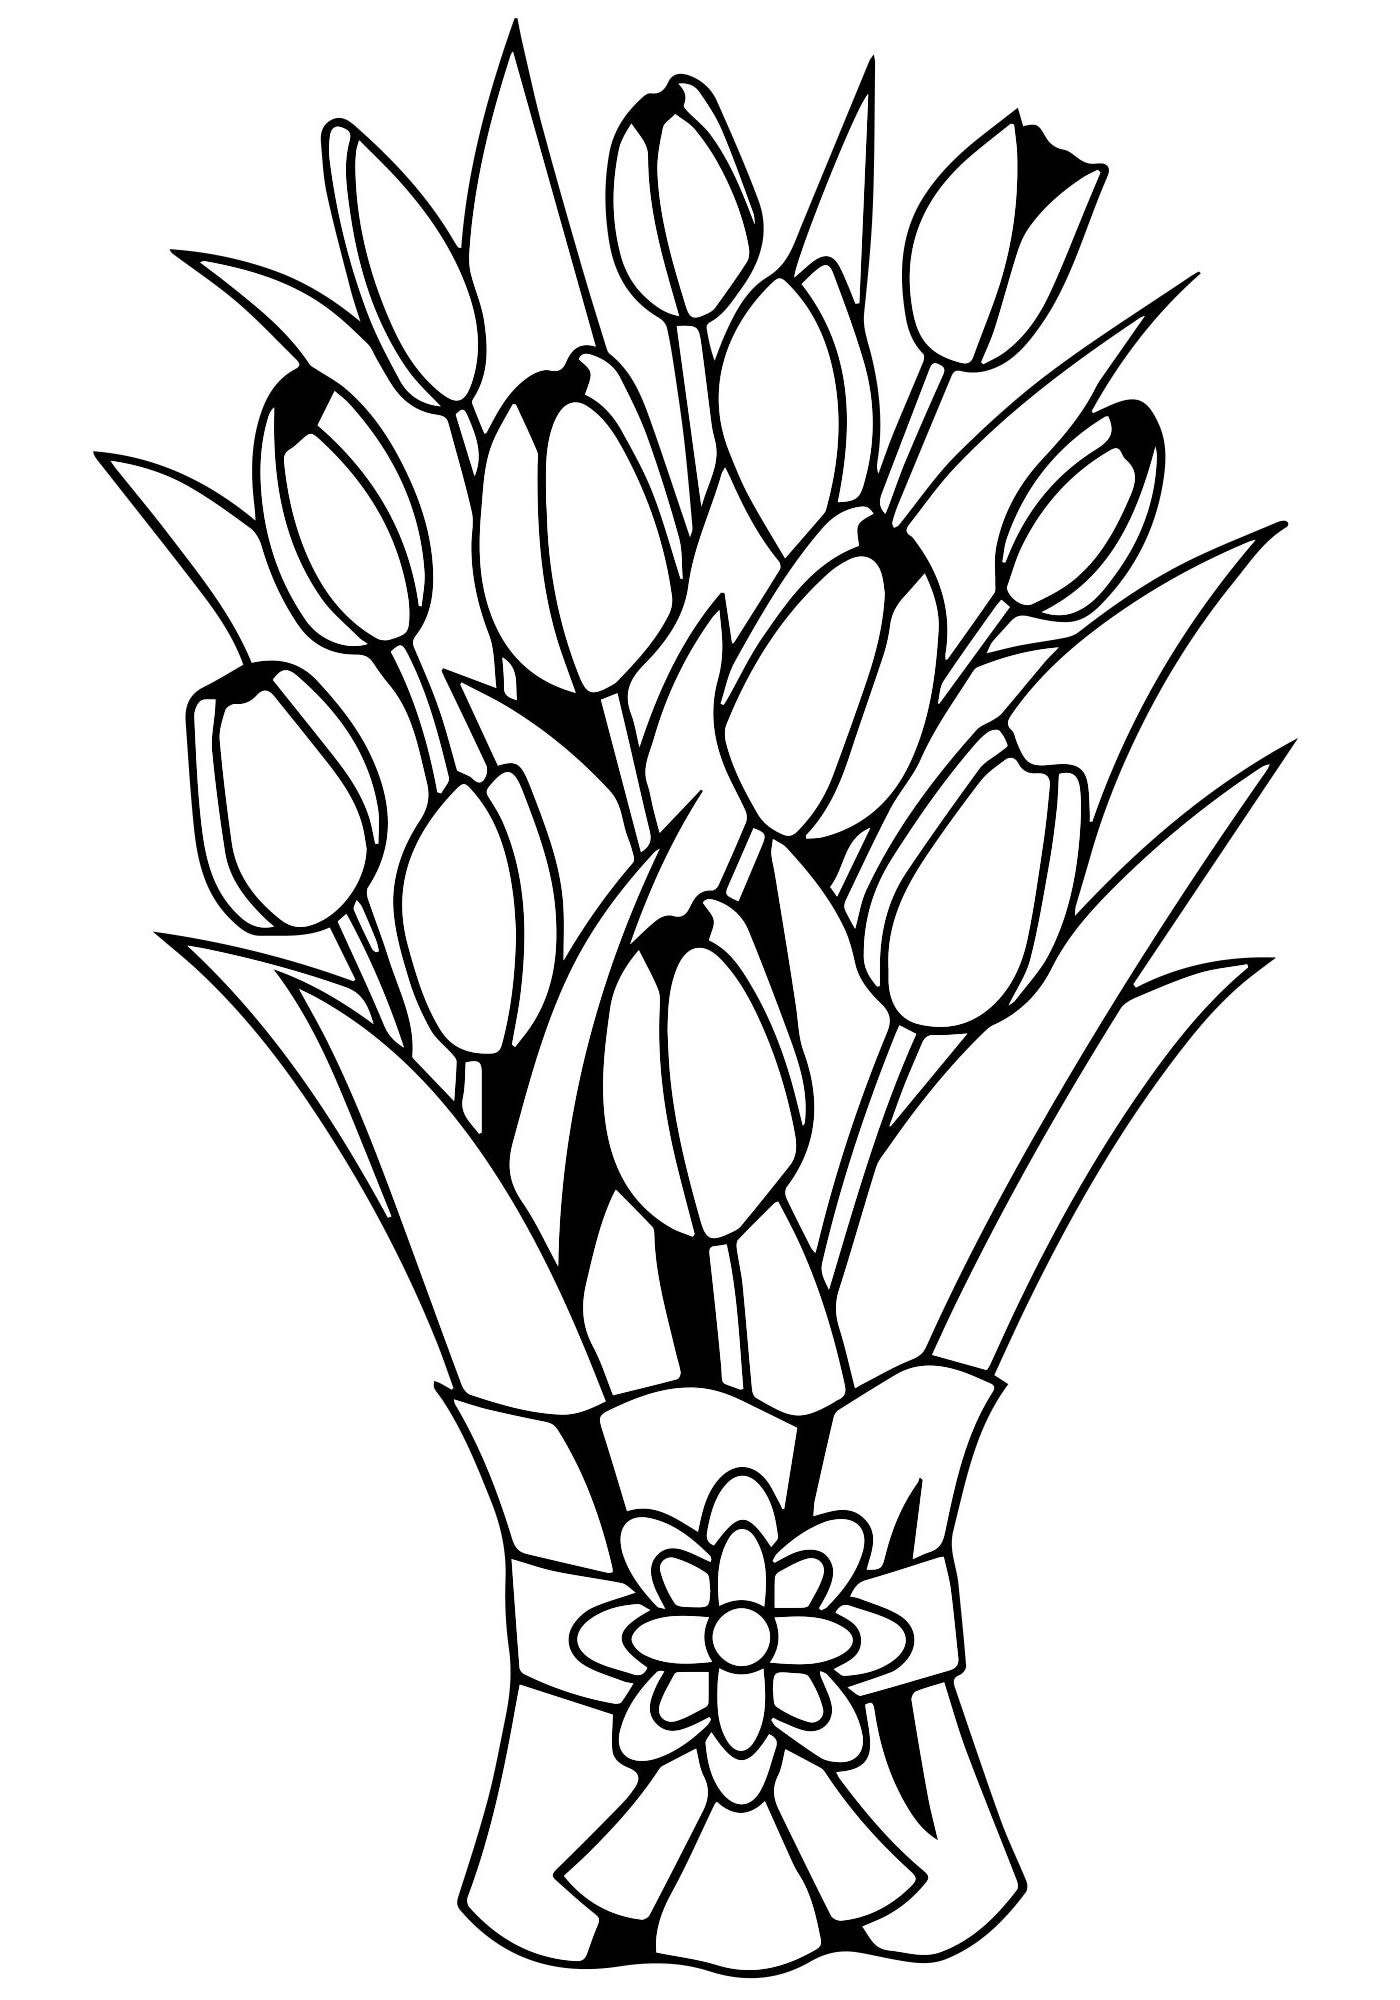 Impressive tulips coloring book for kids 5-6 years old